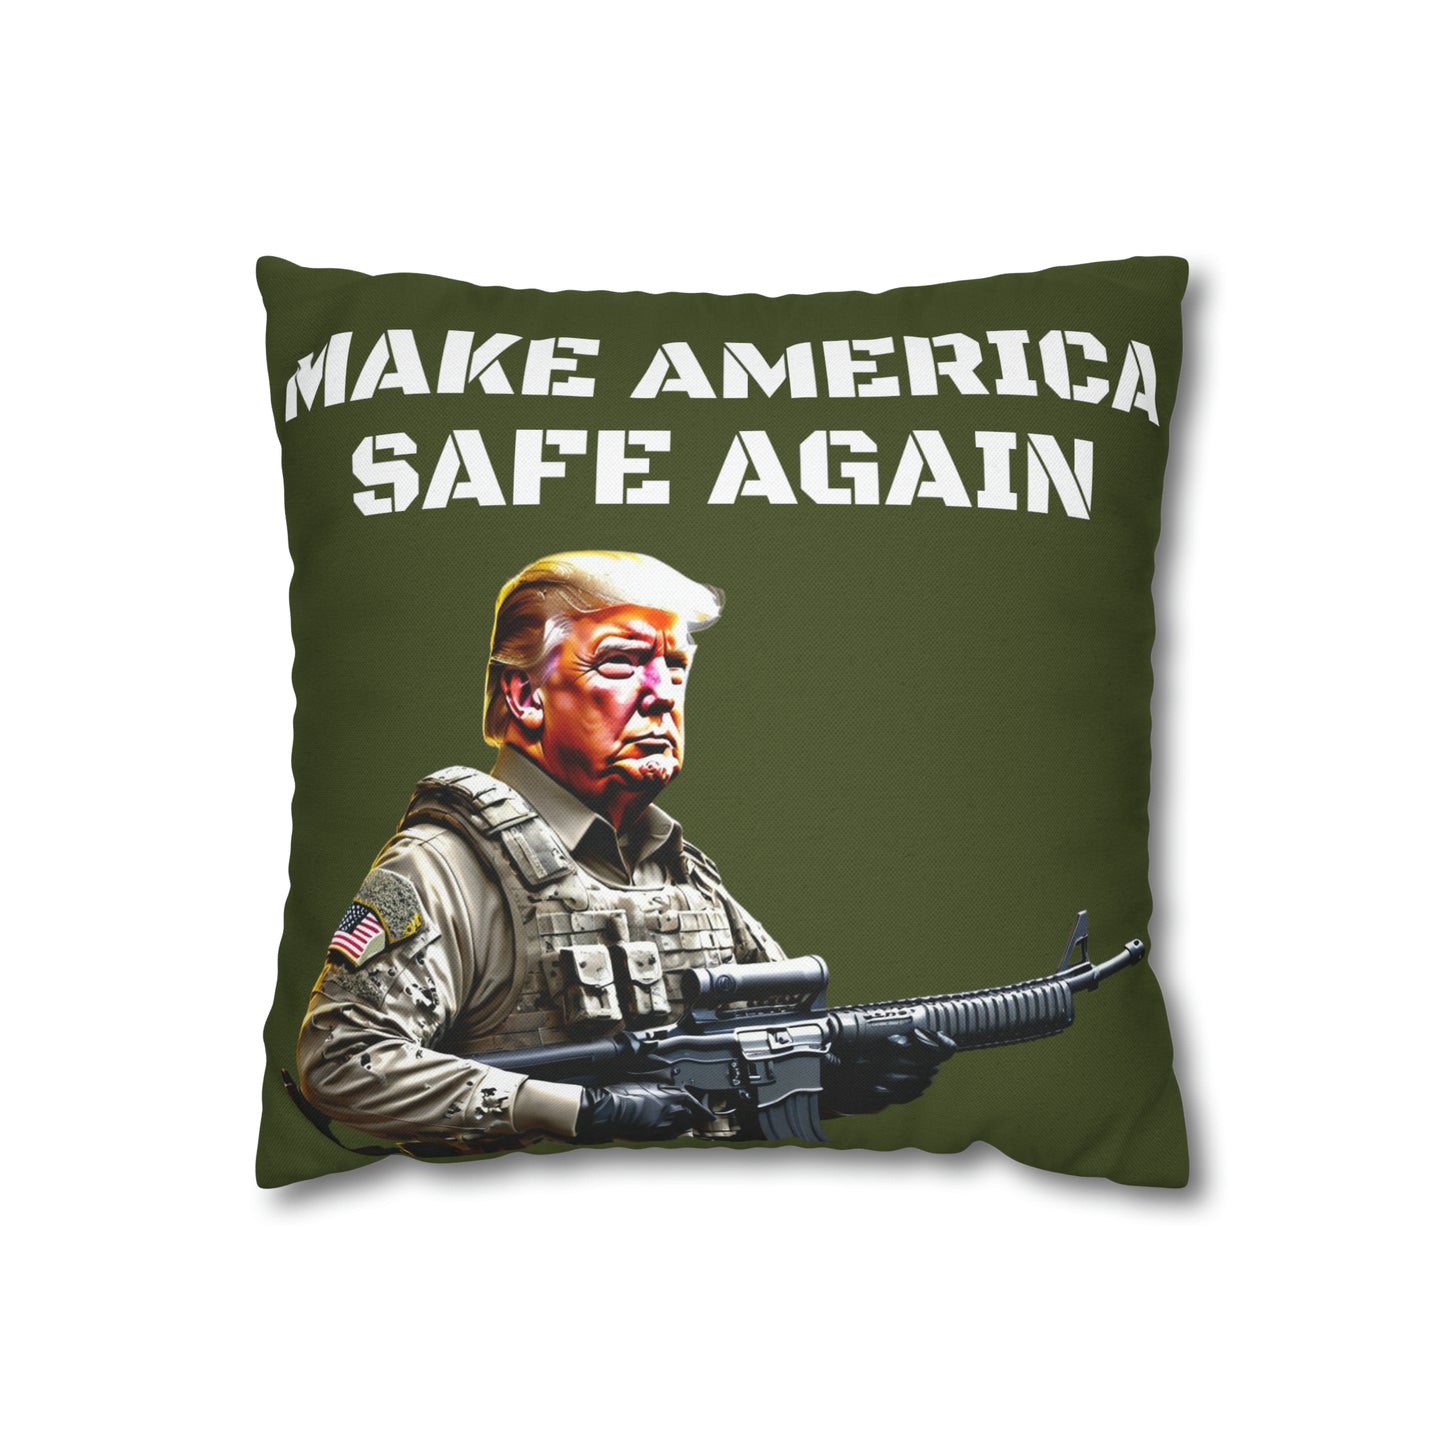 Make America Safe Again Soldier Trump 2 sided Throw Pillow Case